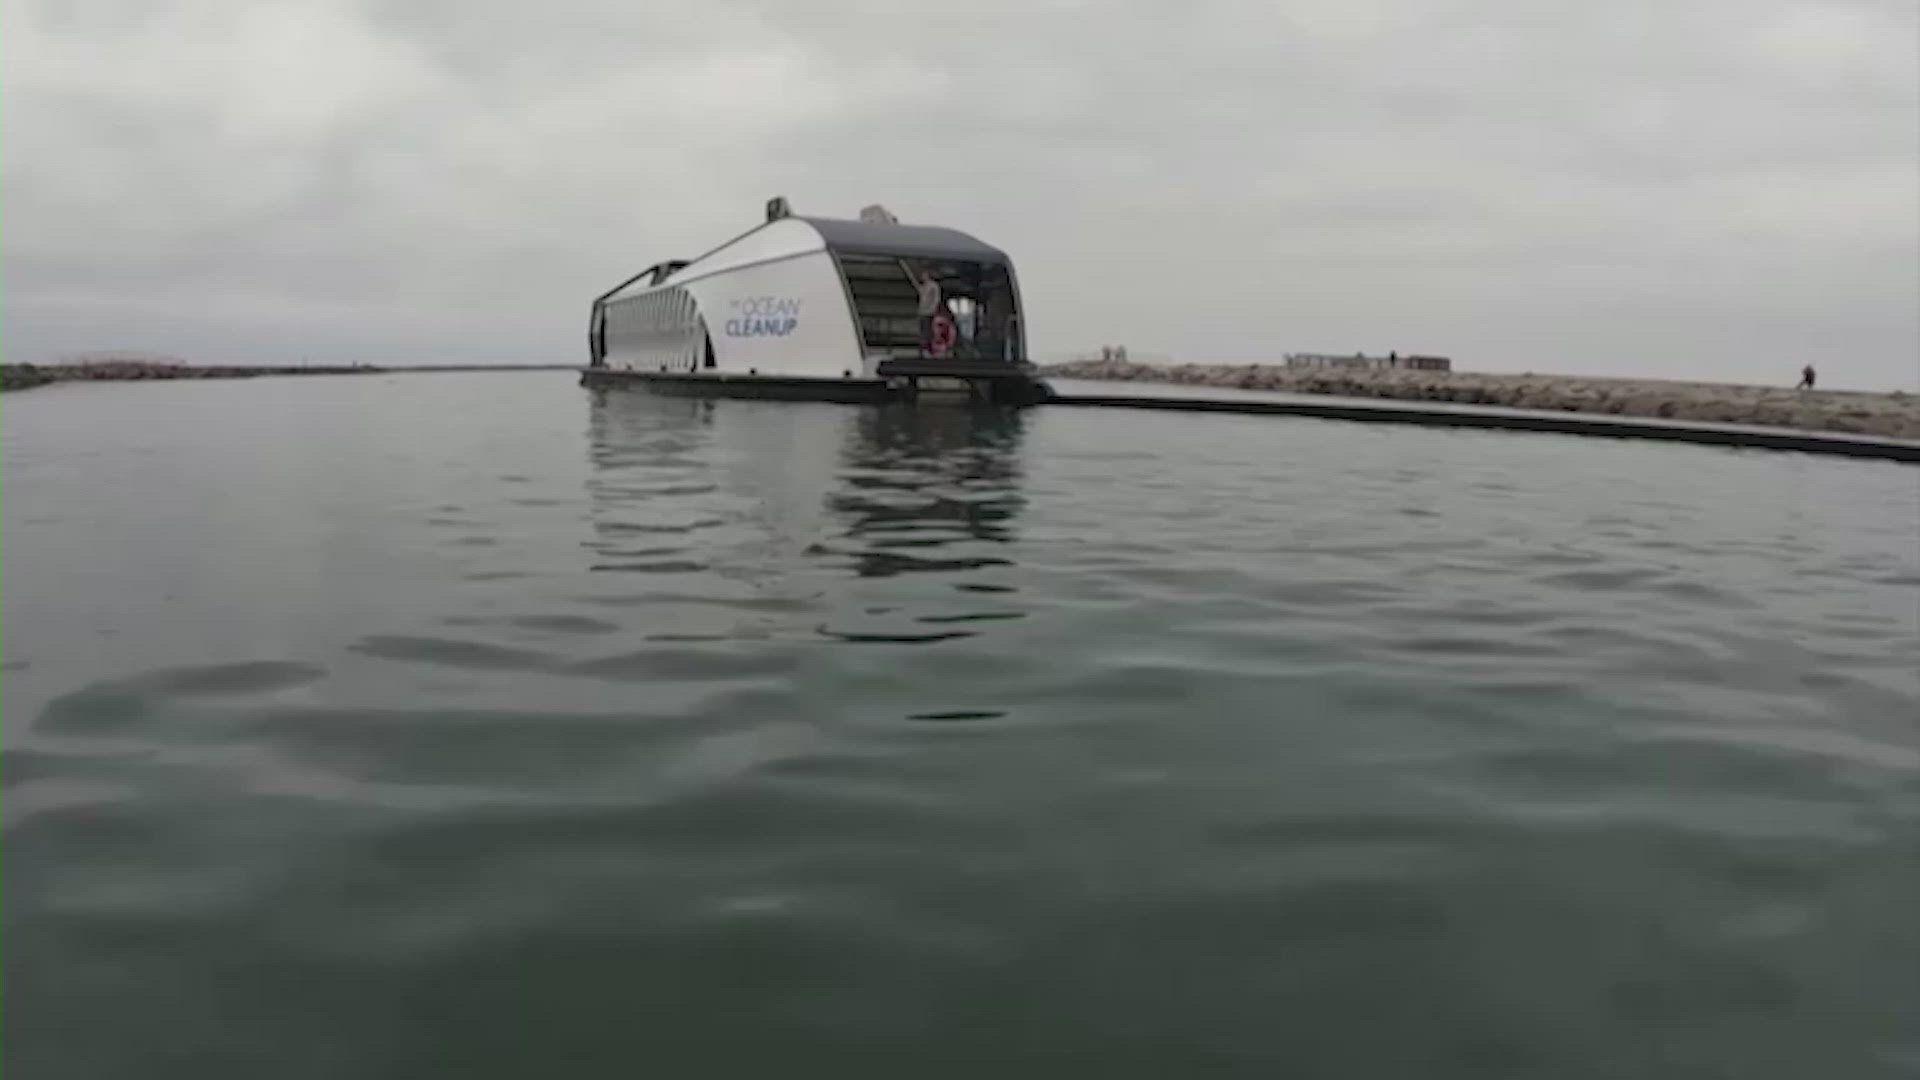 77 tons less trash made it into the ocean thanks to this